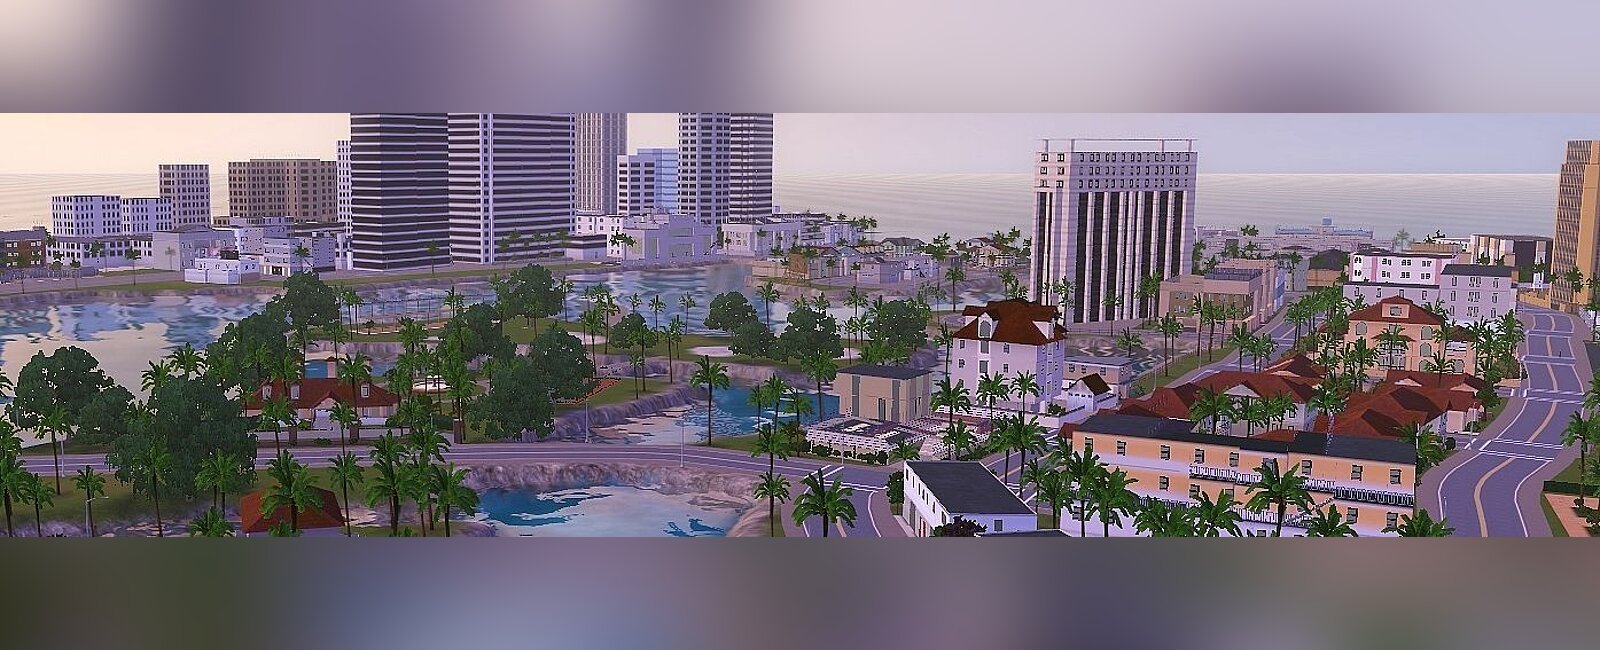 GTA 6 leak debunked, Vice City map in GTA V not connected to the